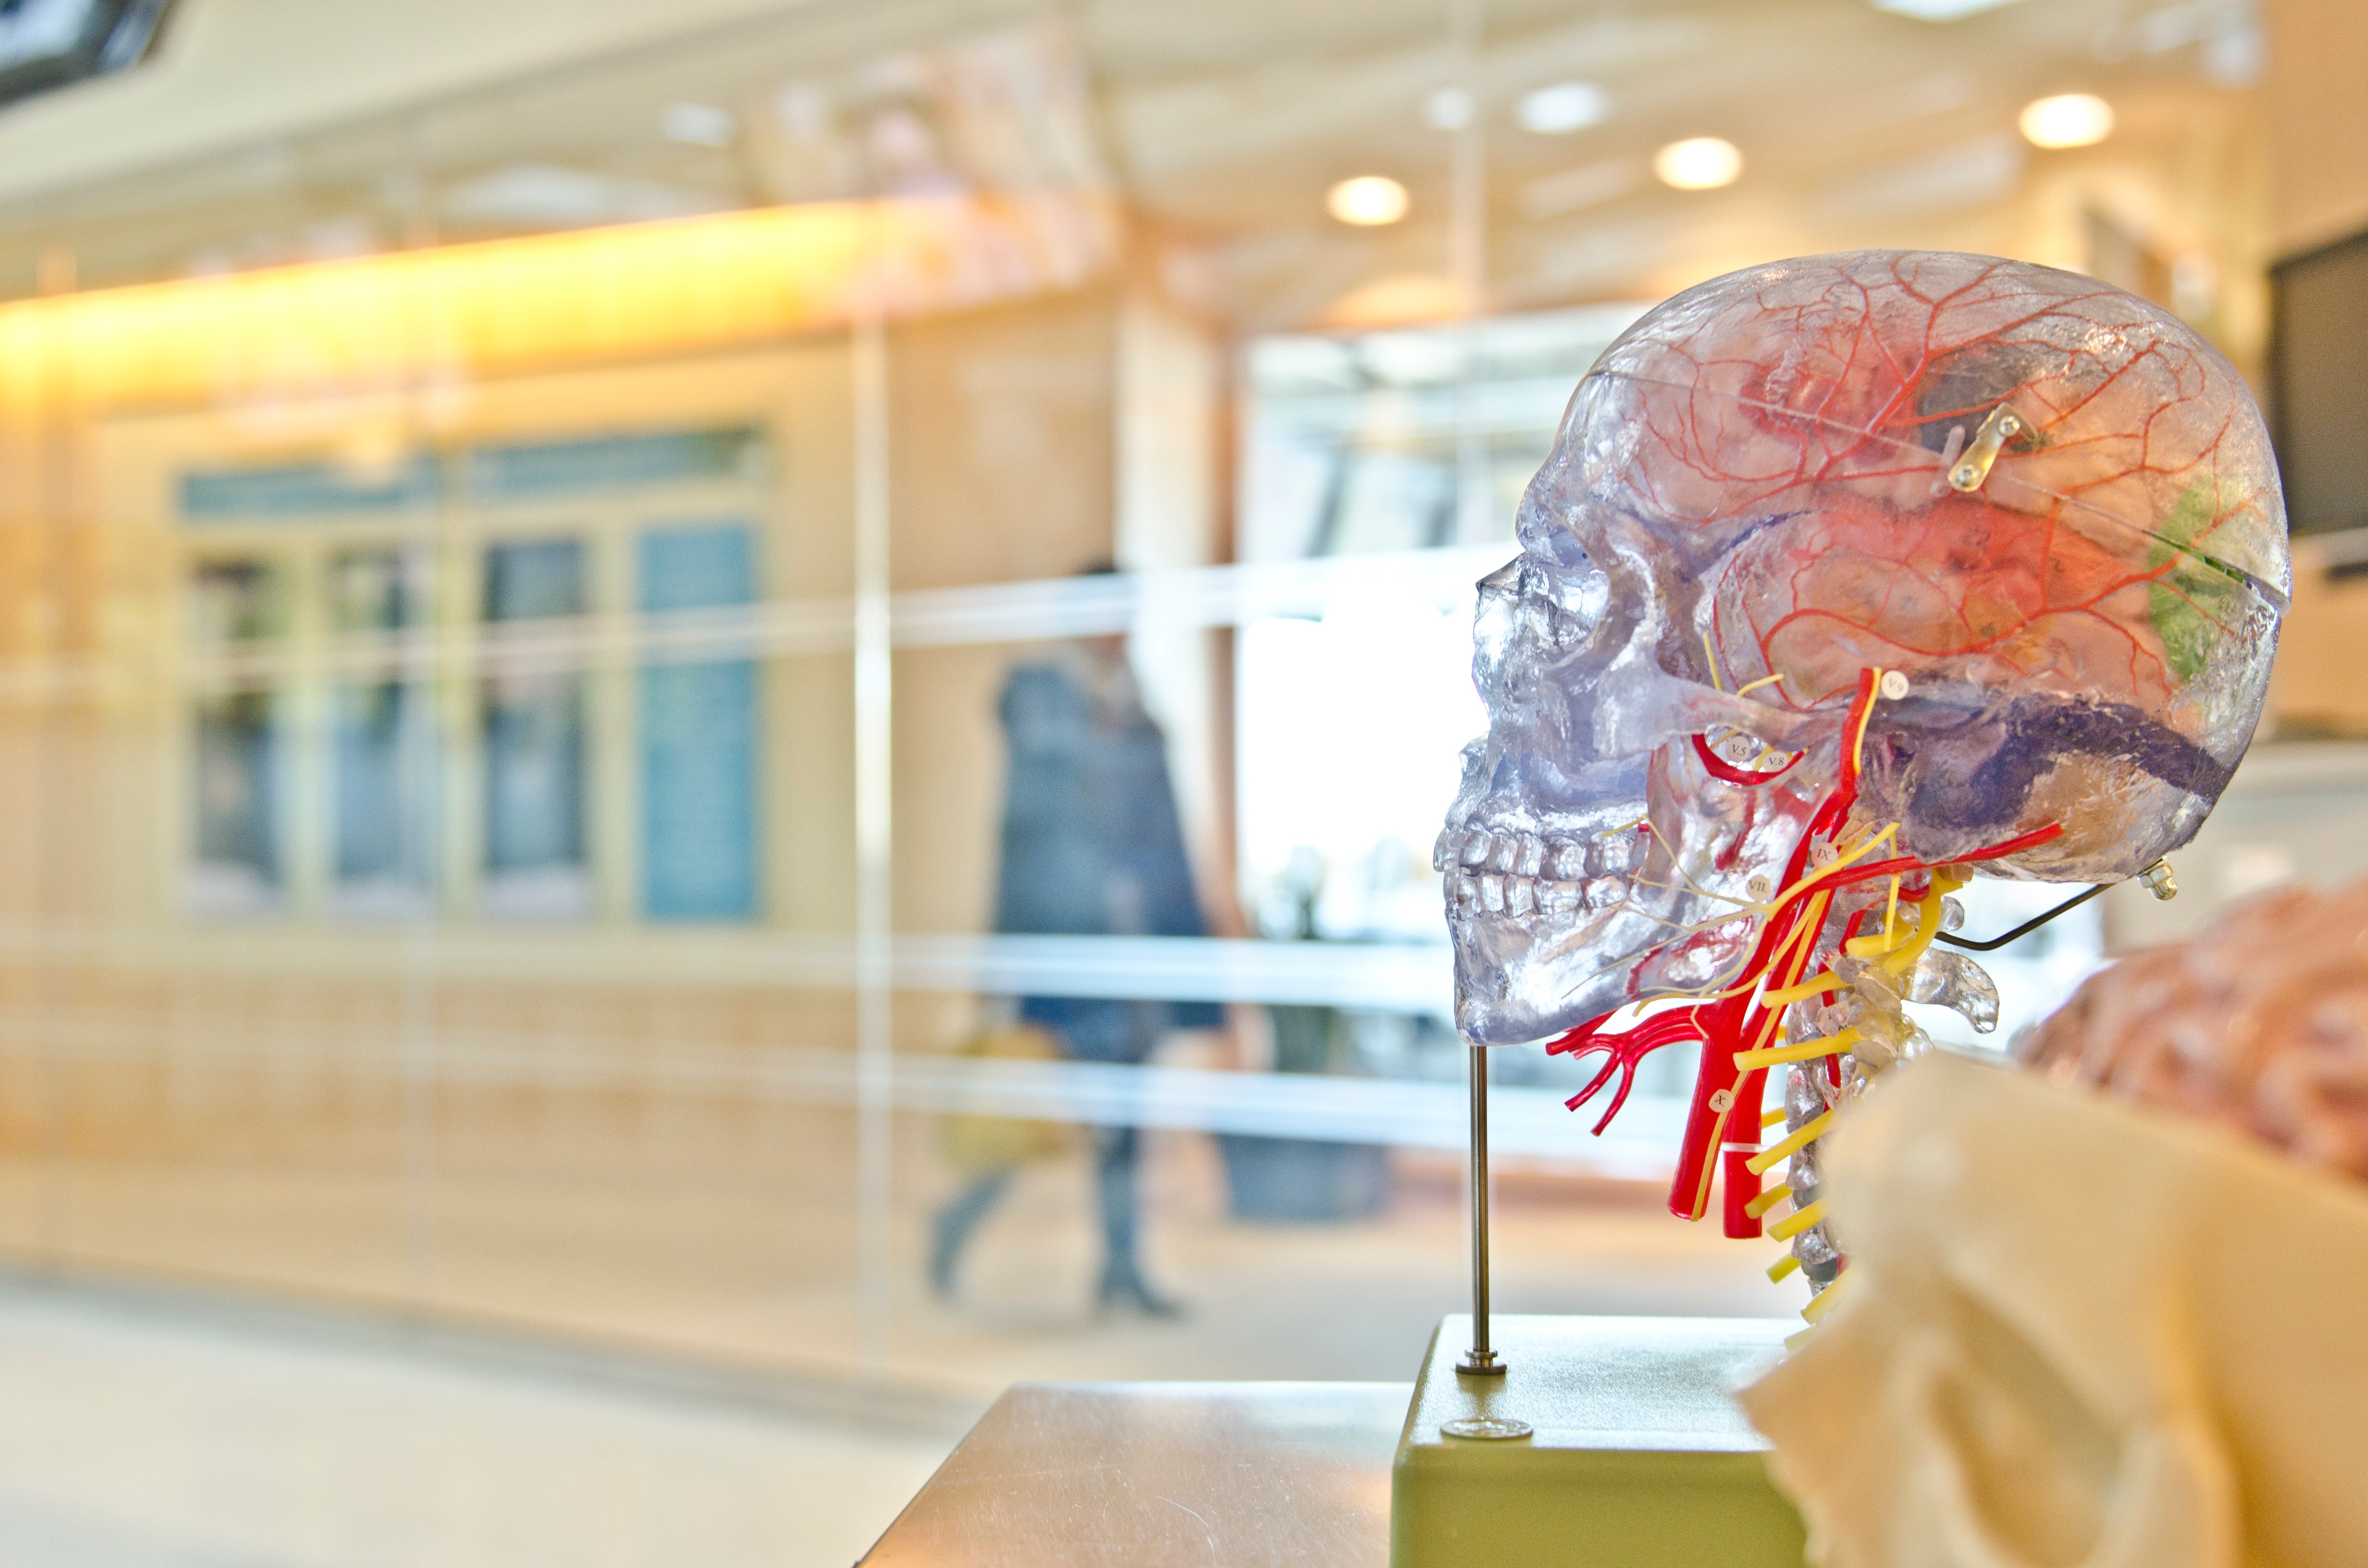 Model of a human brain photographed in an anatomy lab.